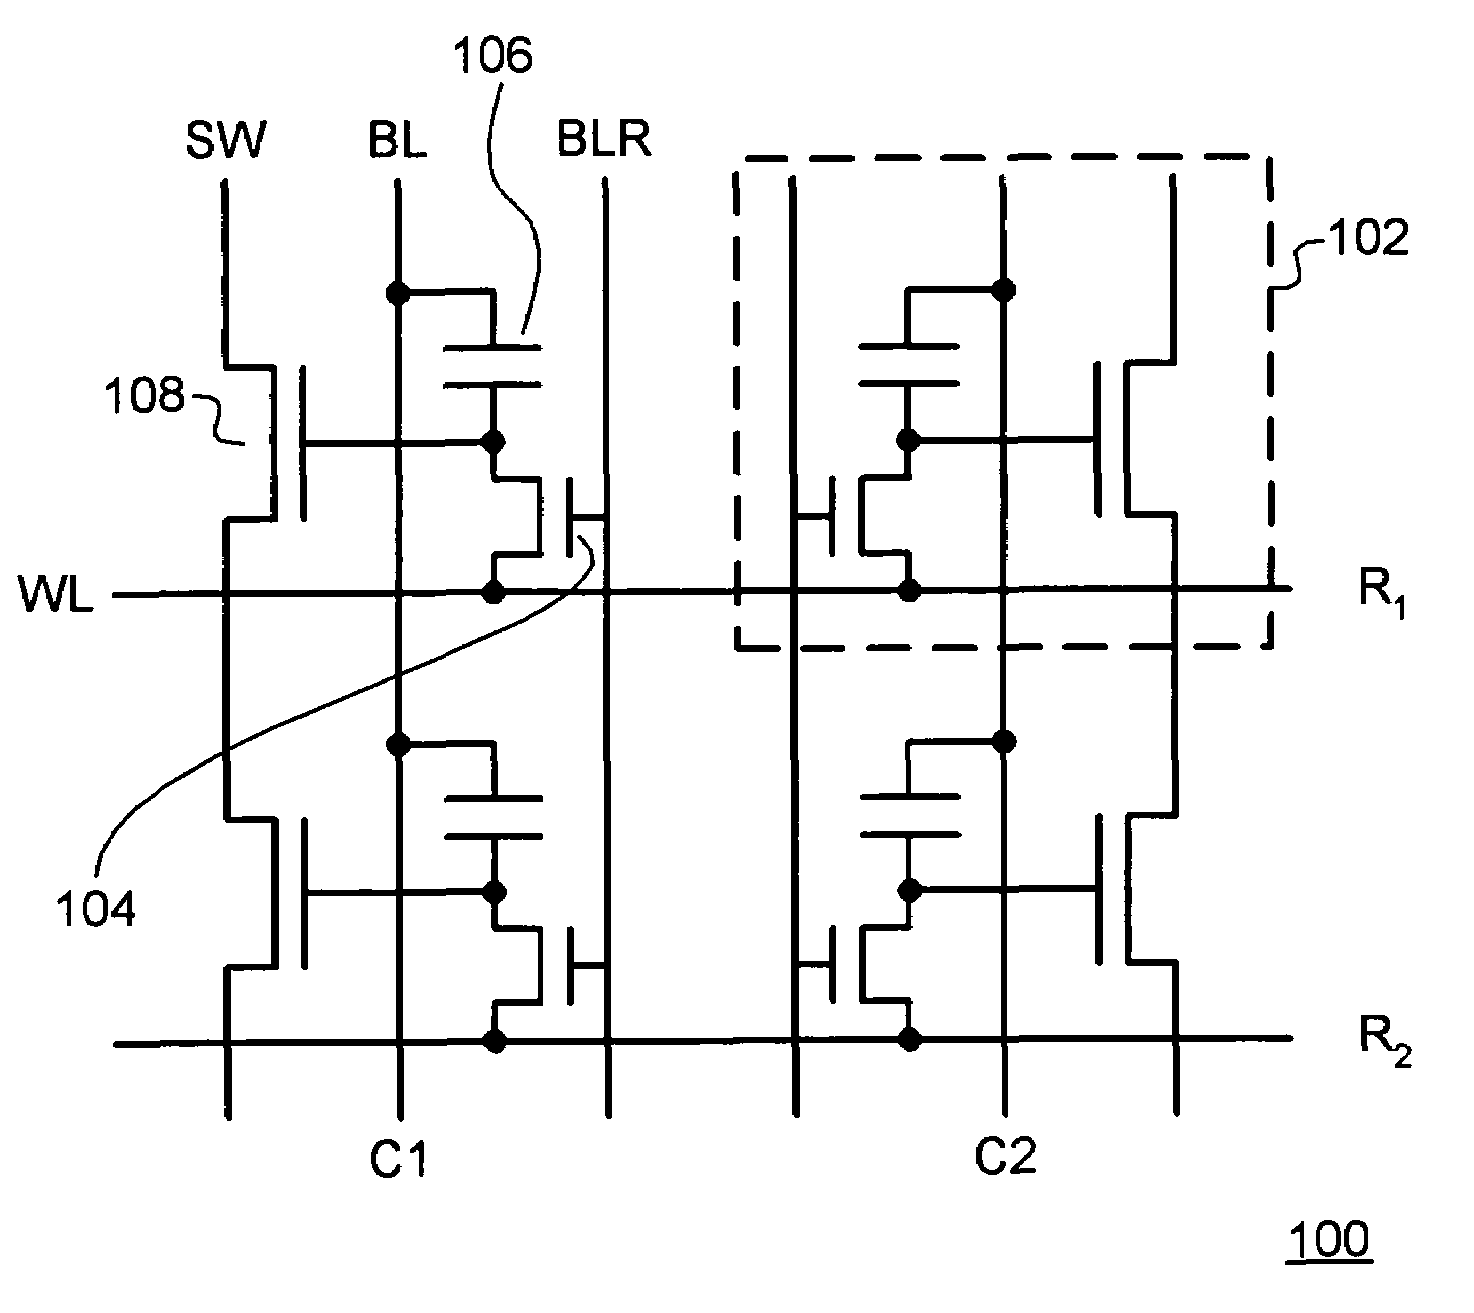 Combination field programmable gate array allowing dynamic reprogrammability and non-votatile programmability based upon transistor gate oxide breakdown